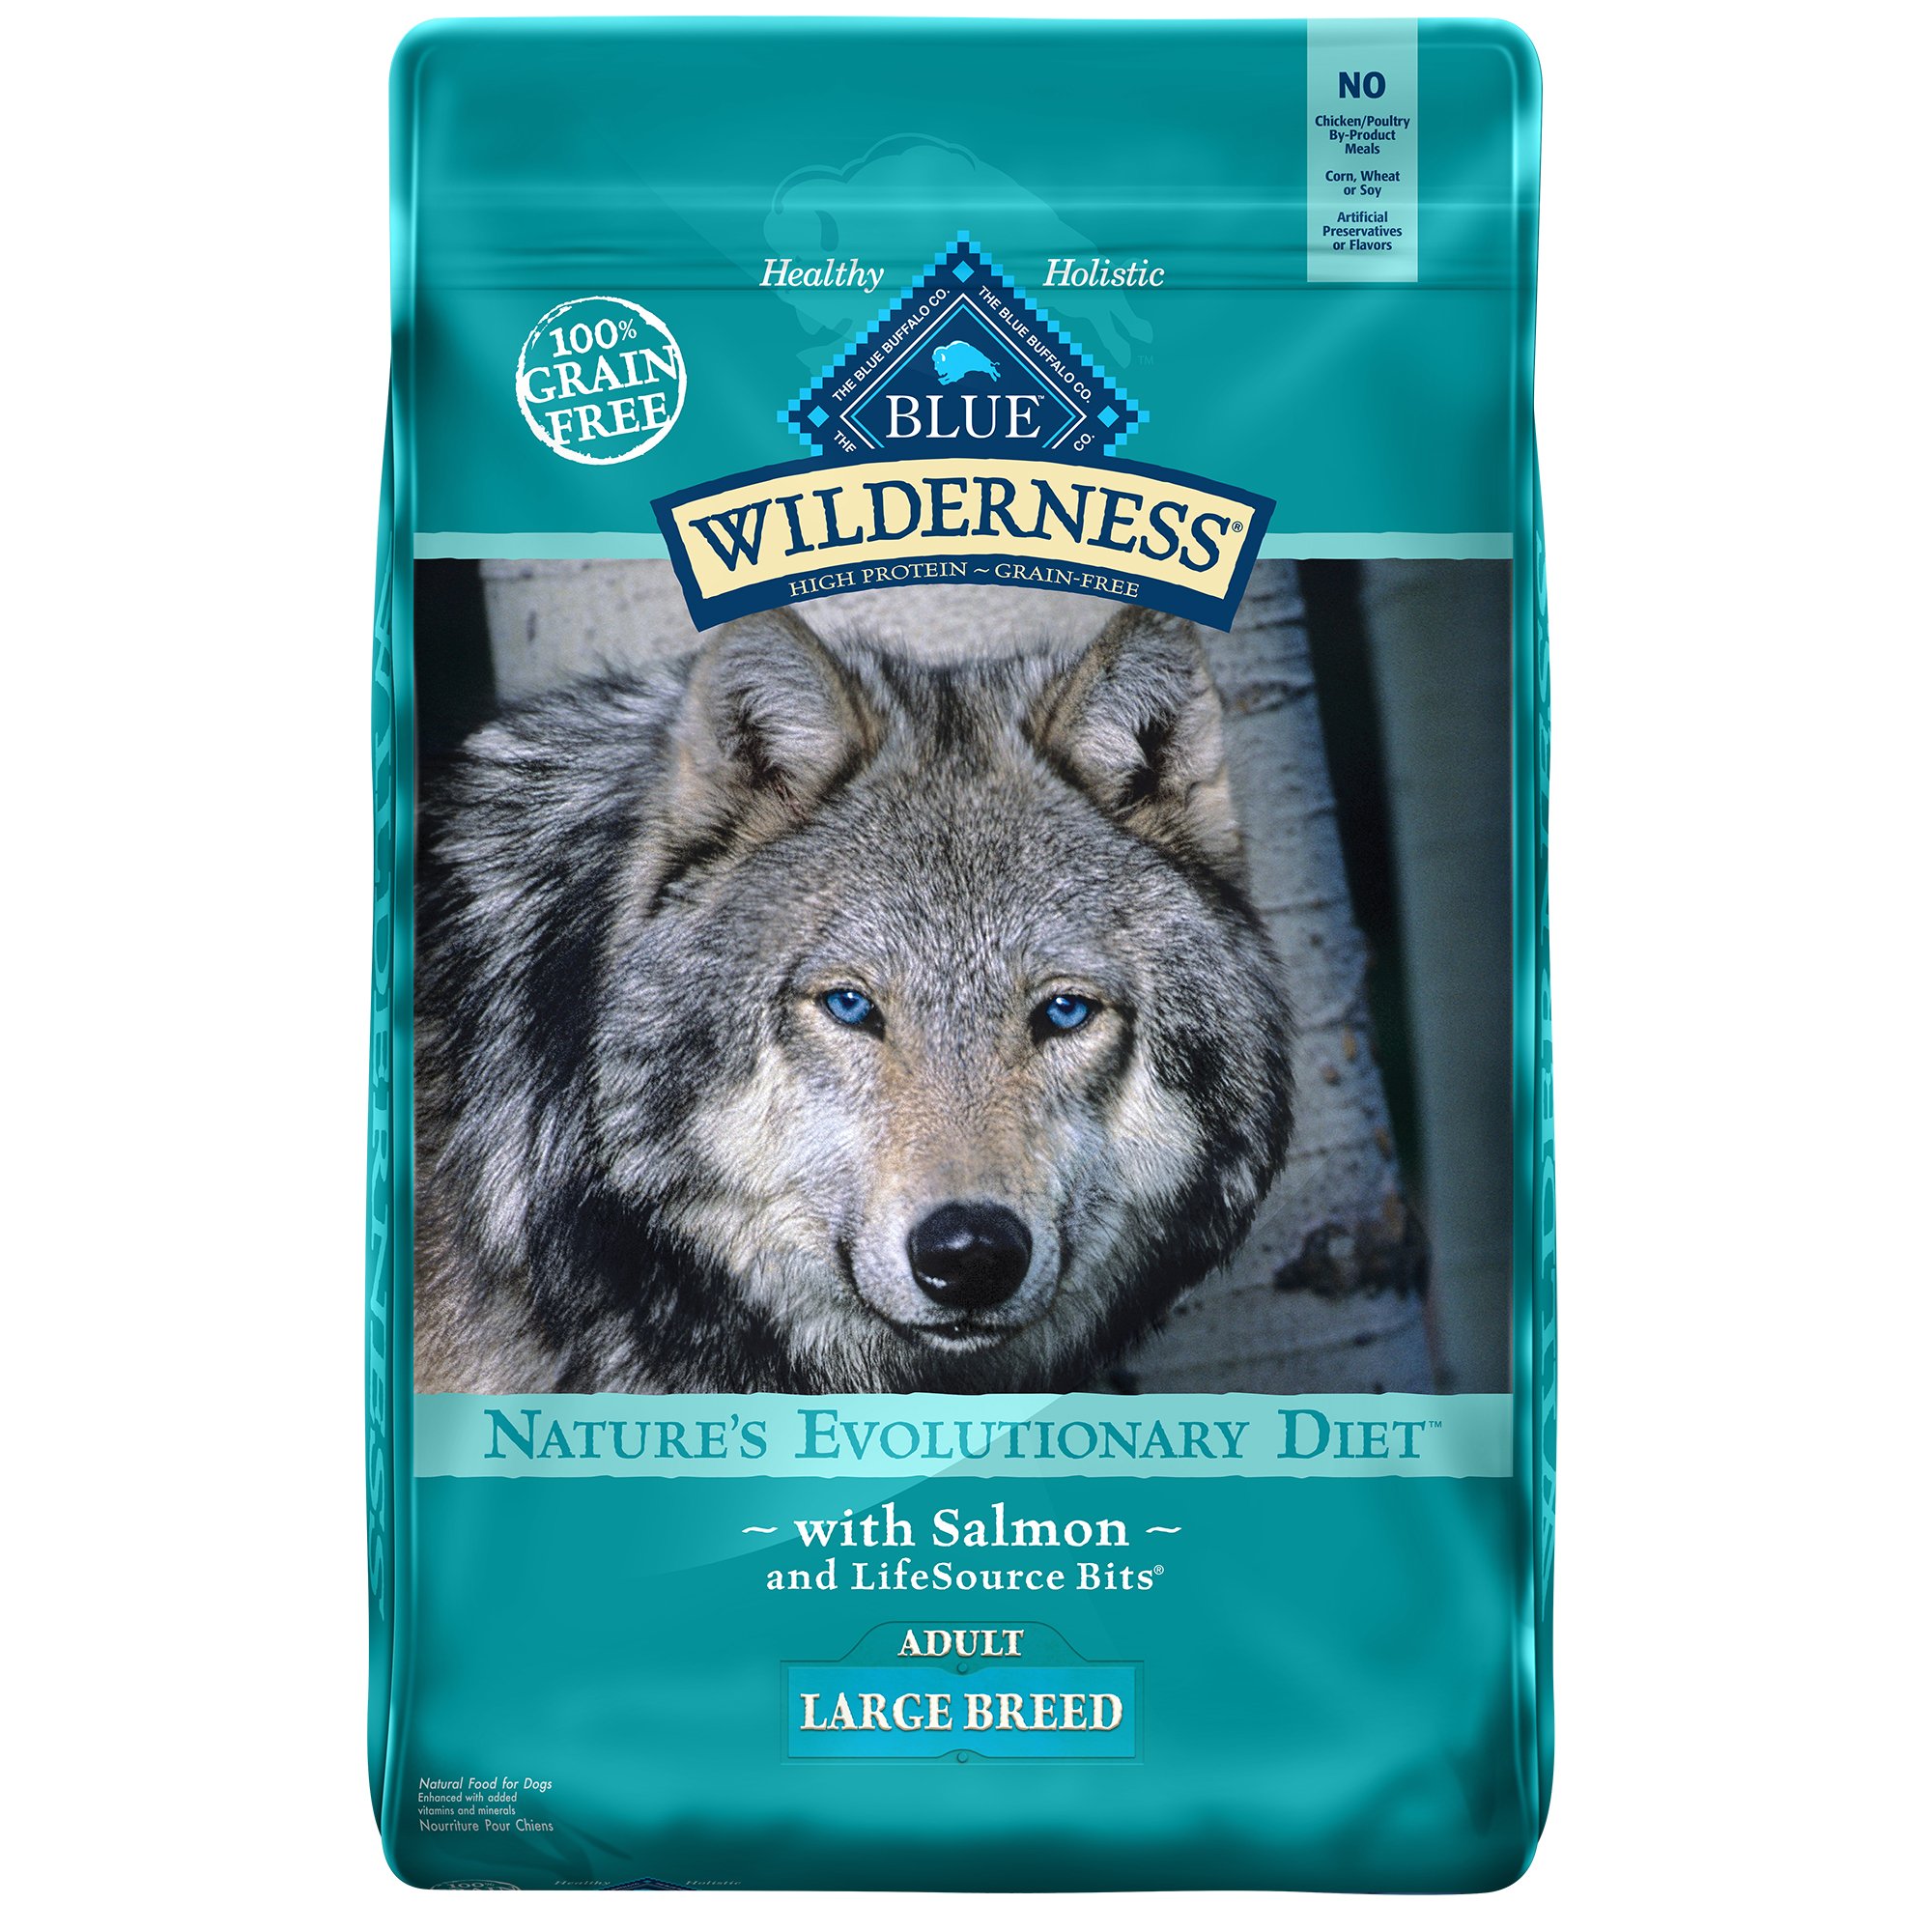 Is Blue Buffalo Dog Food Good For Dogs